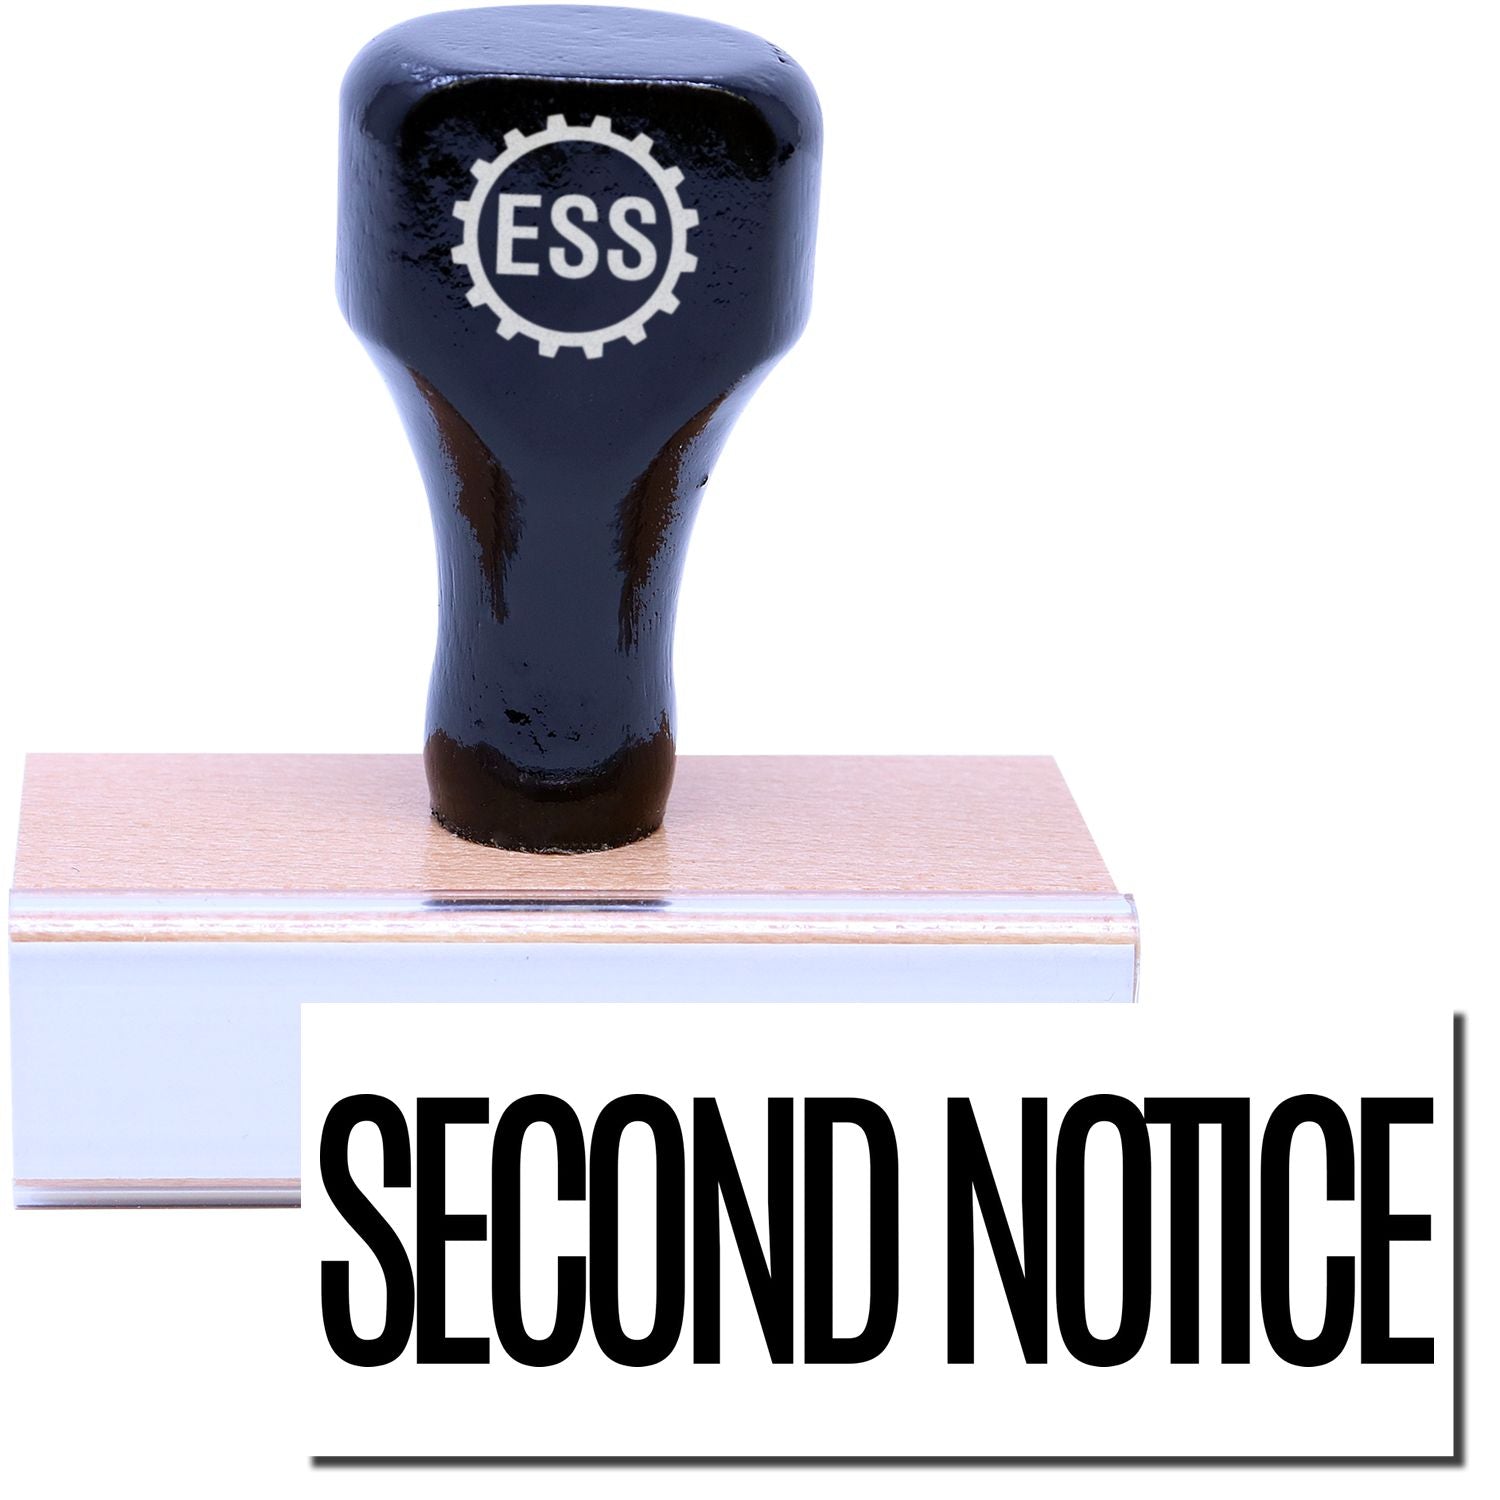 A stock office rubber stamp with a stamped image showing how the text "SECOND NOTICE " in a large narrow font is displayed after stamping.